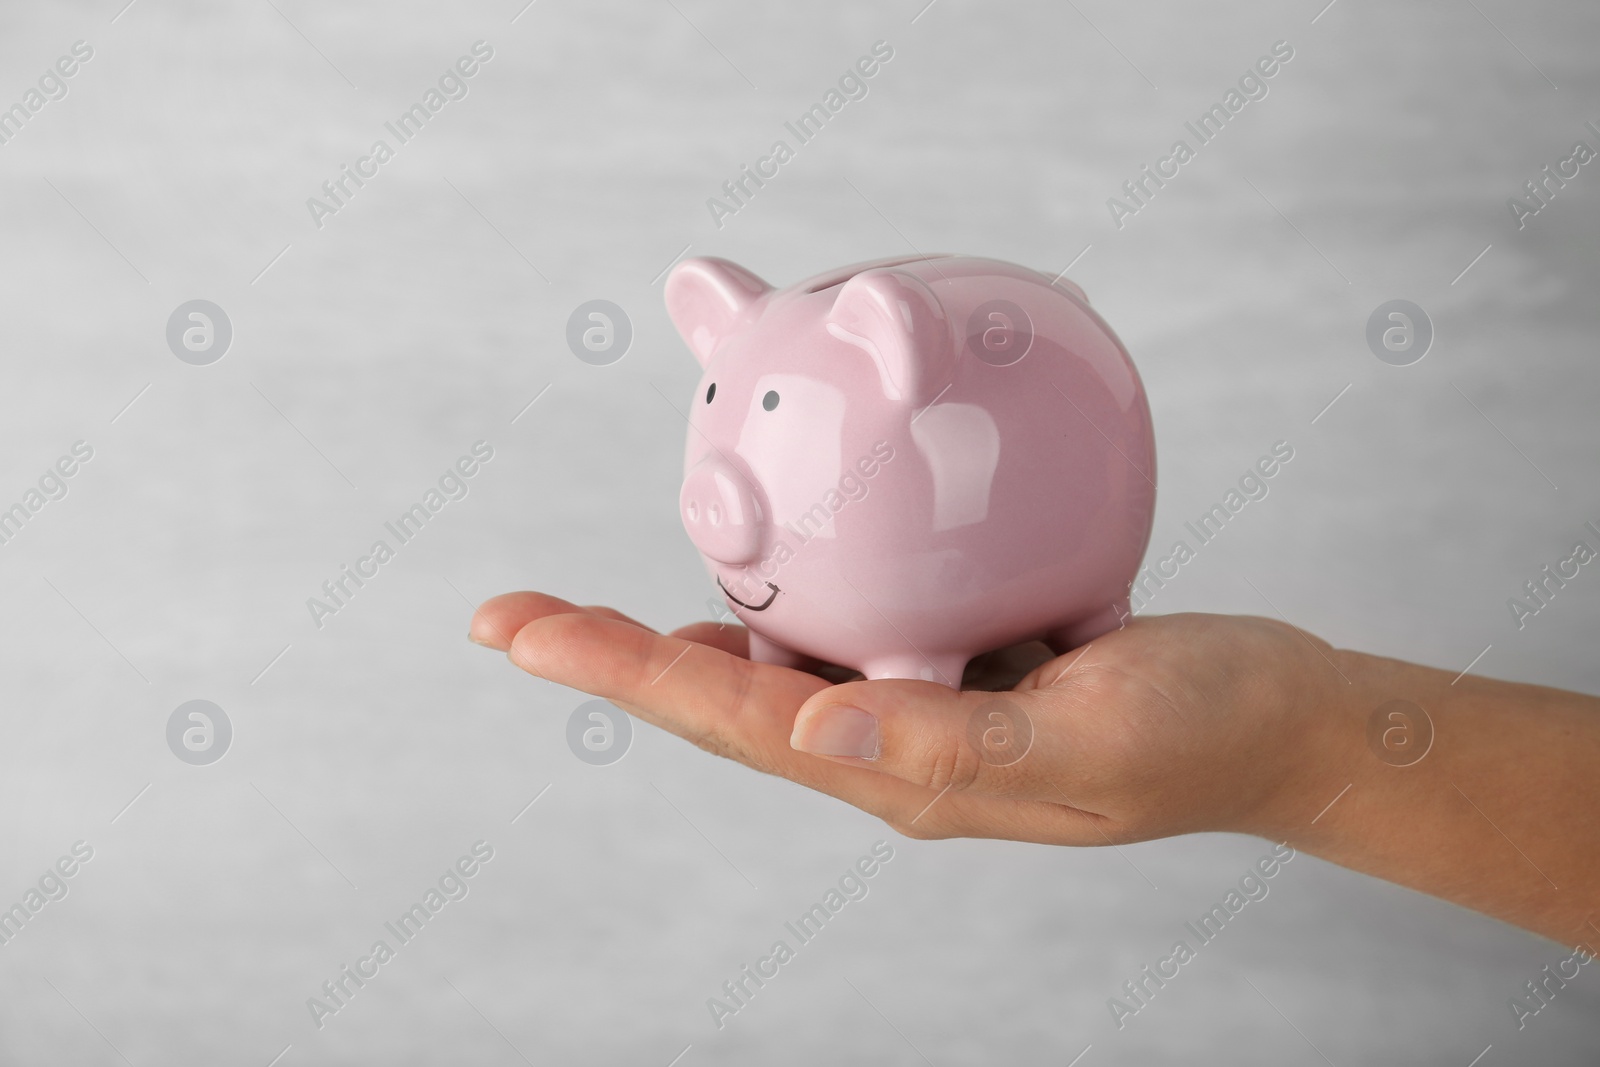 Photo of Woman holding piggy bank on grey background, closeup view